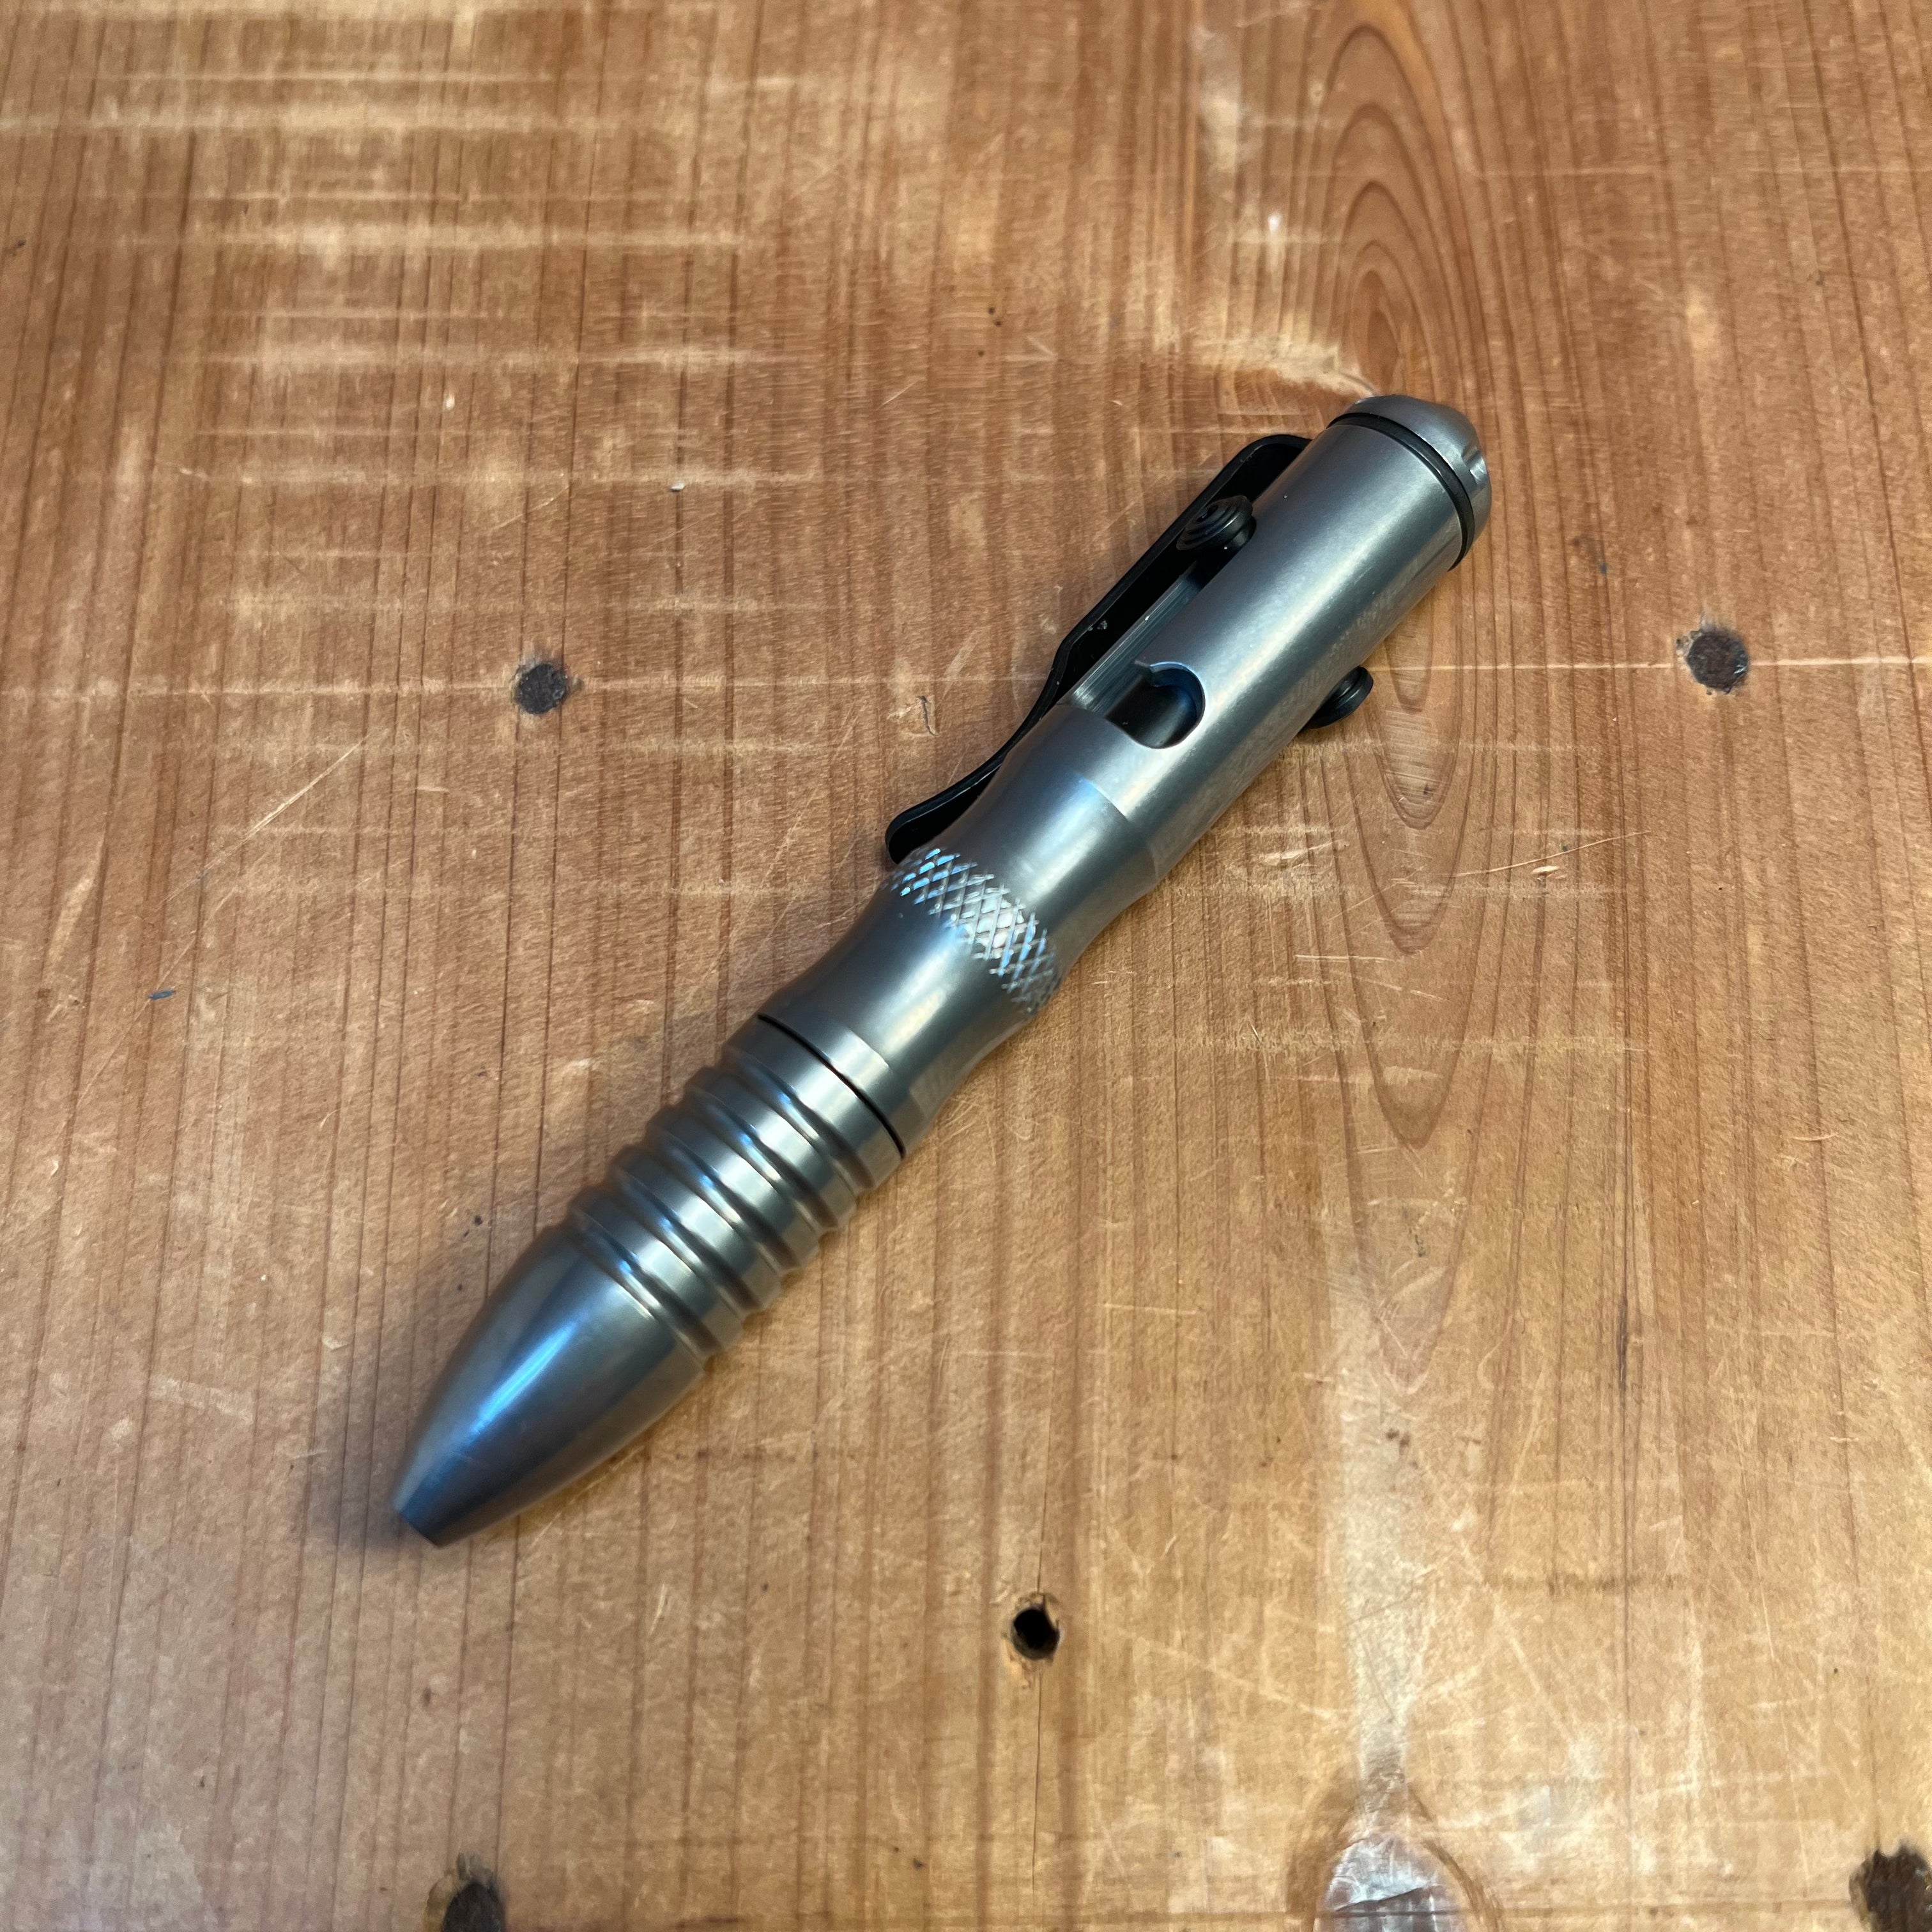 Benchmade - Tactical Pen Shorthand - Acero inoxidable - 1121